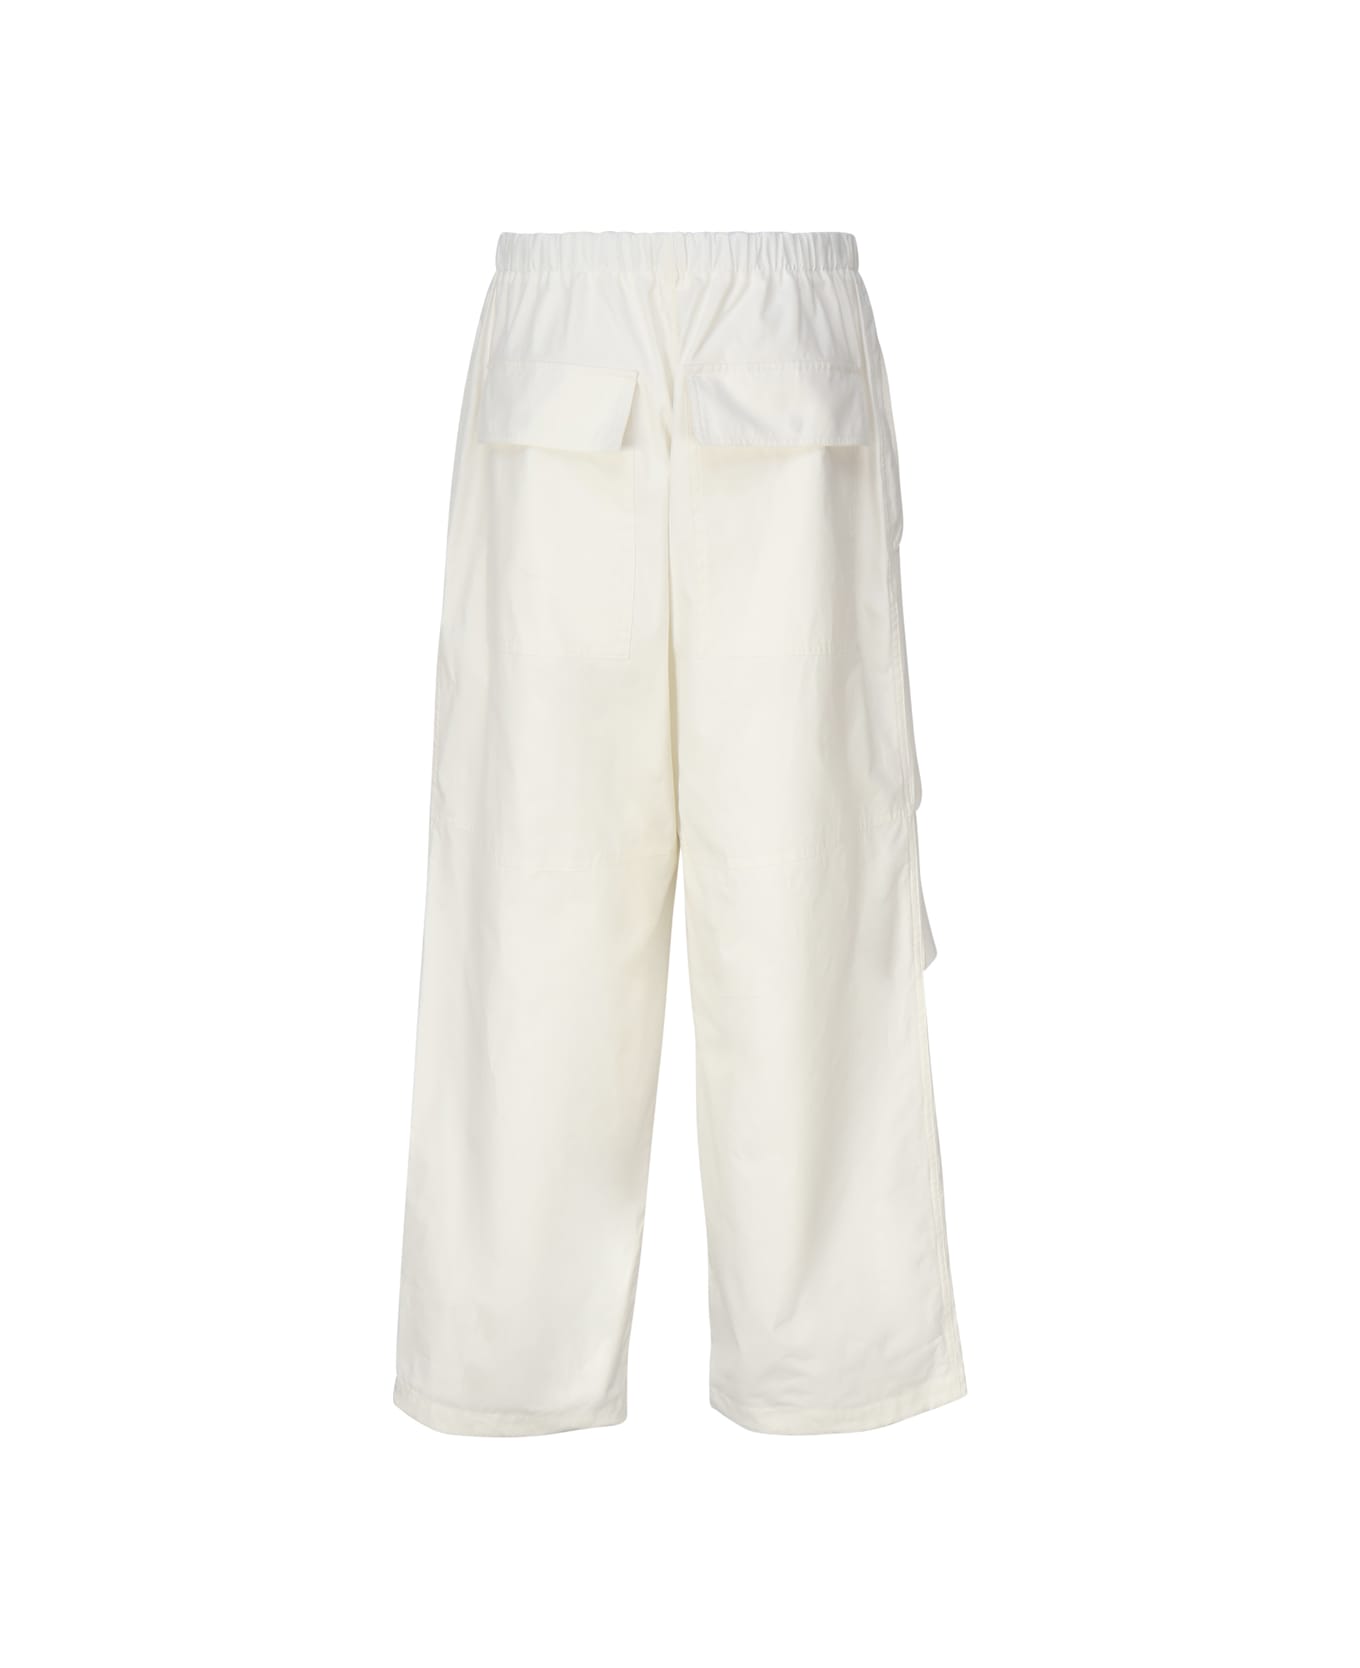 Jil Sander Cotton Trousers With Crease On The Knee - White